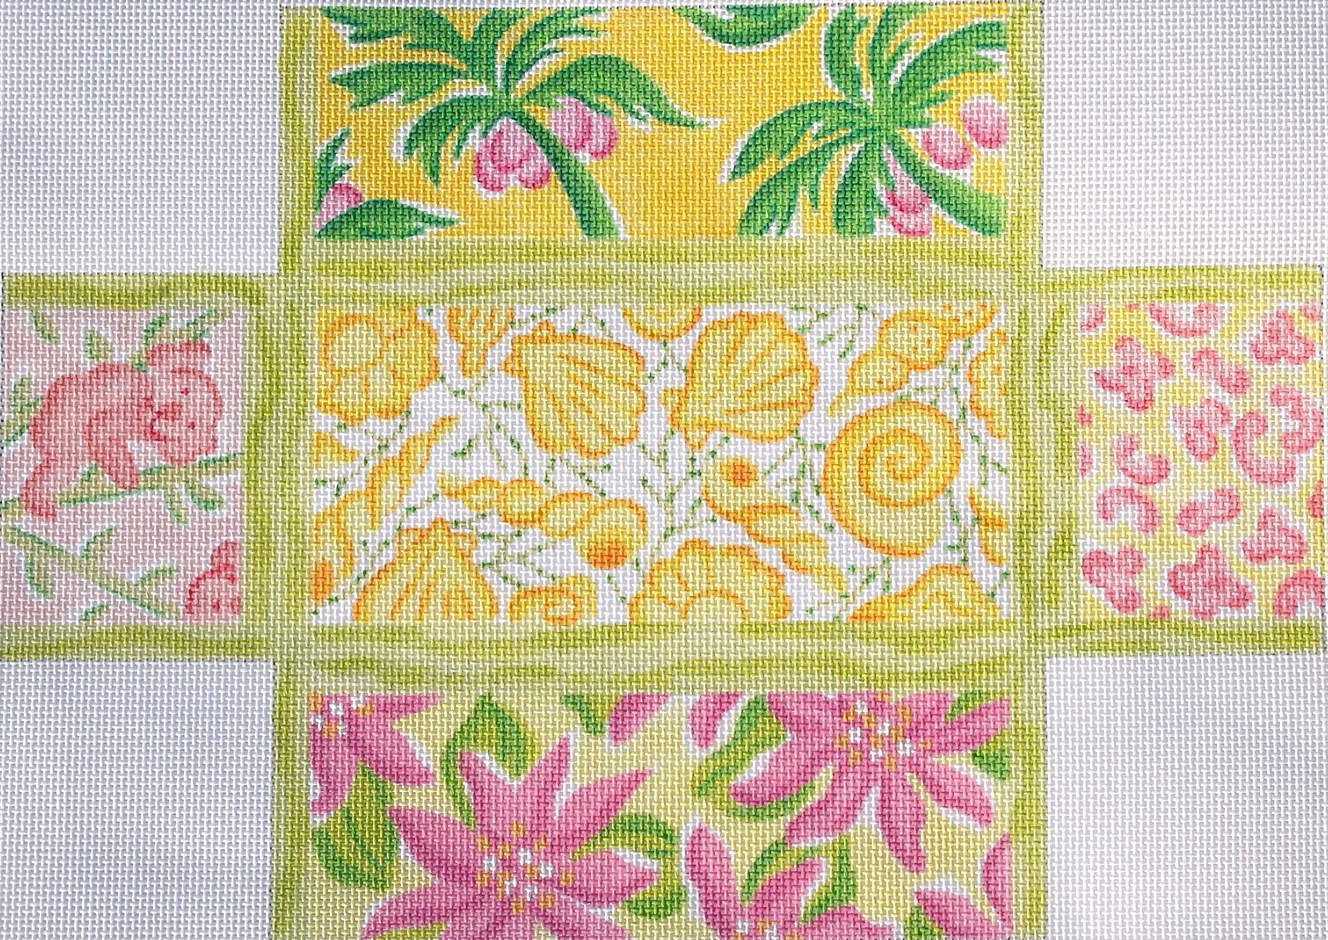 BR-26 Lilly-Inspired Lattice Patchwork Brick Cover